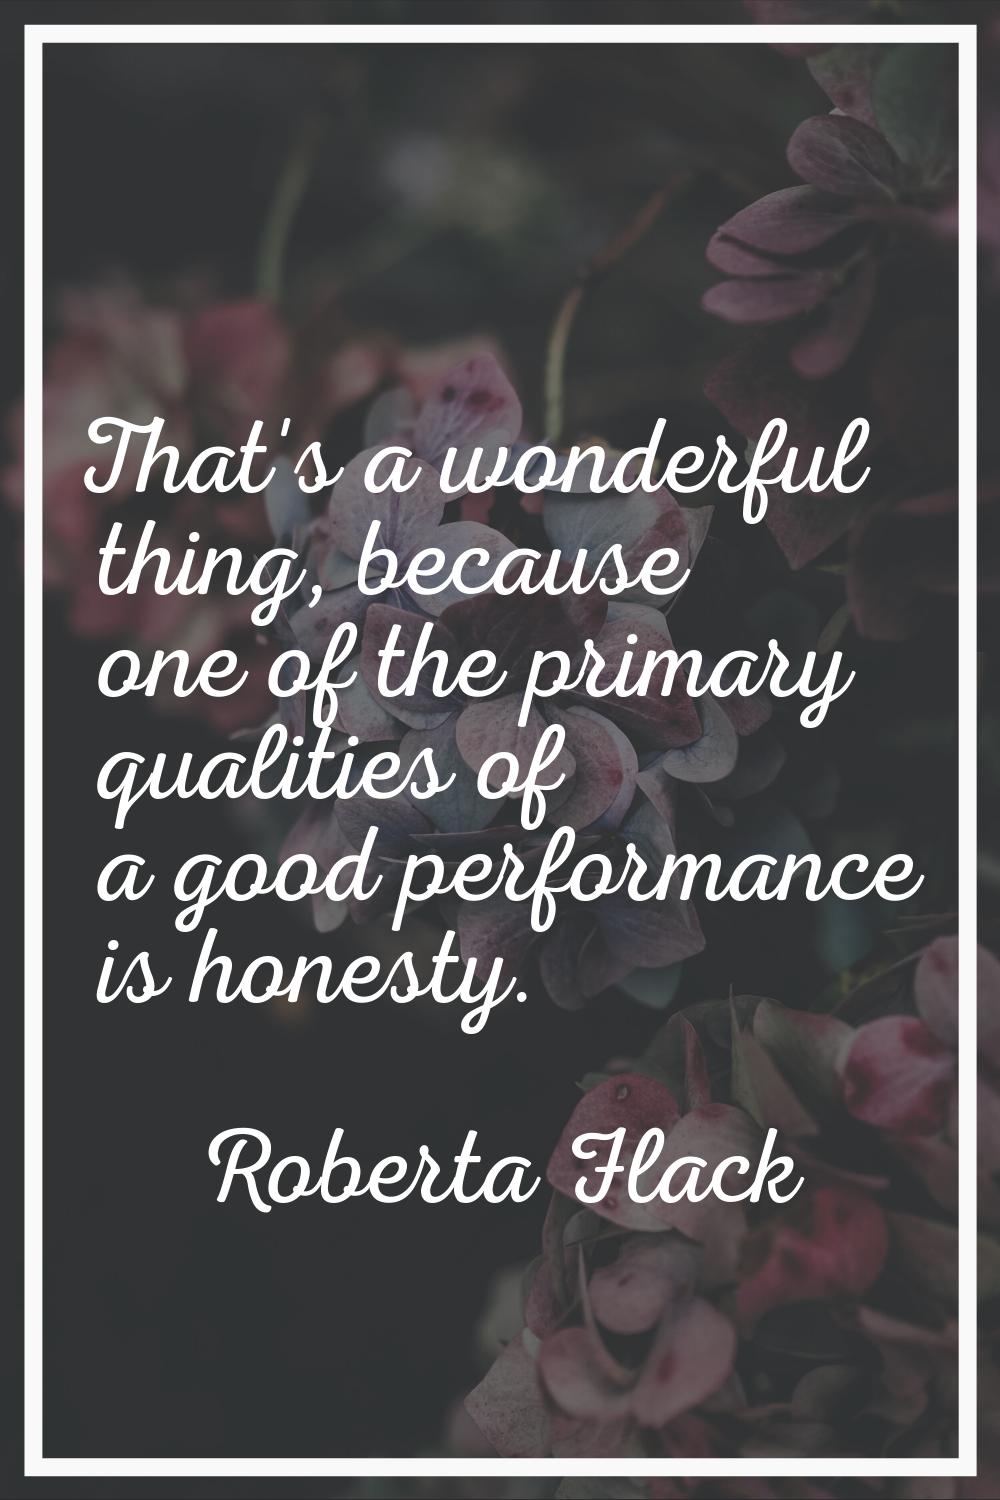 That's a wonderful thing, because one of the primary qualities of a good performance is honesty.